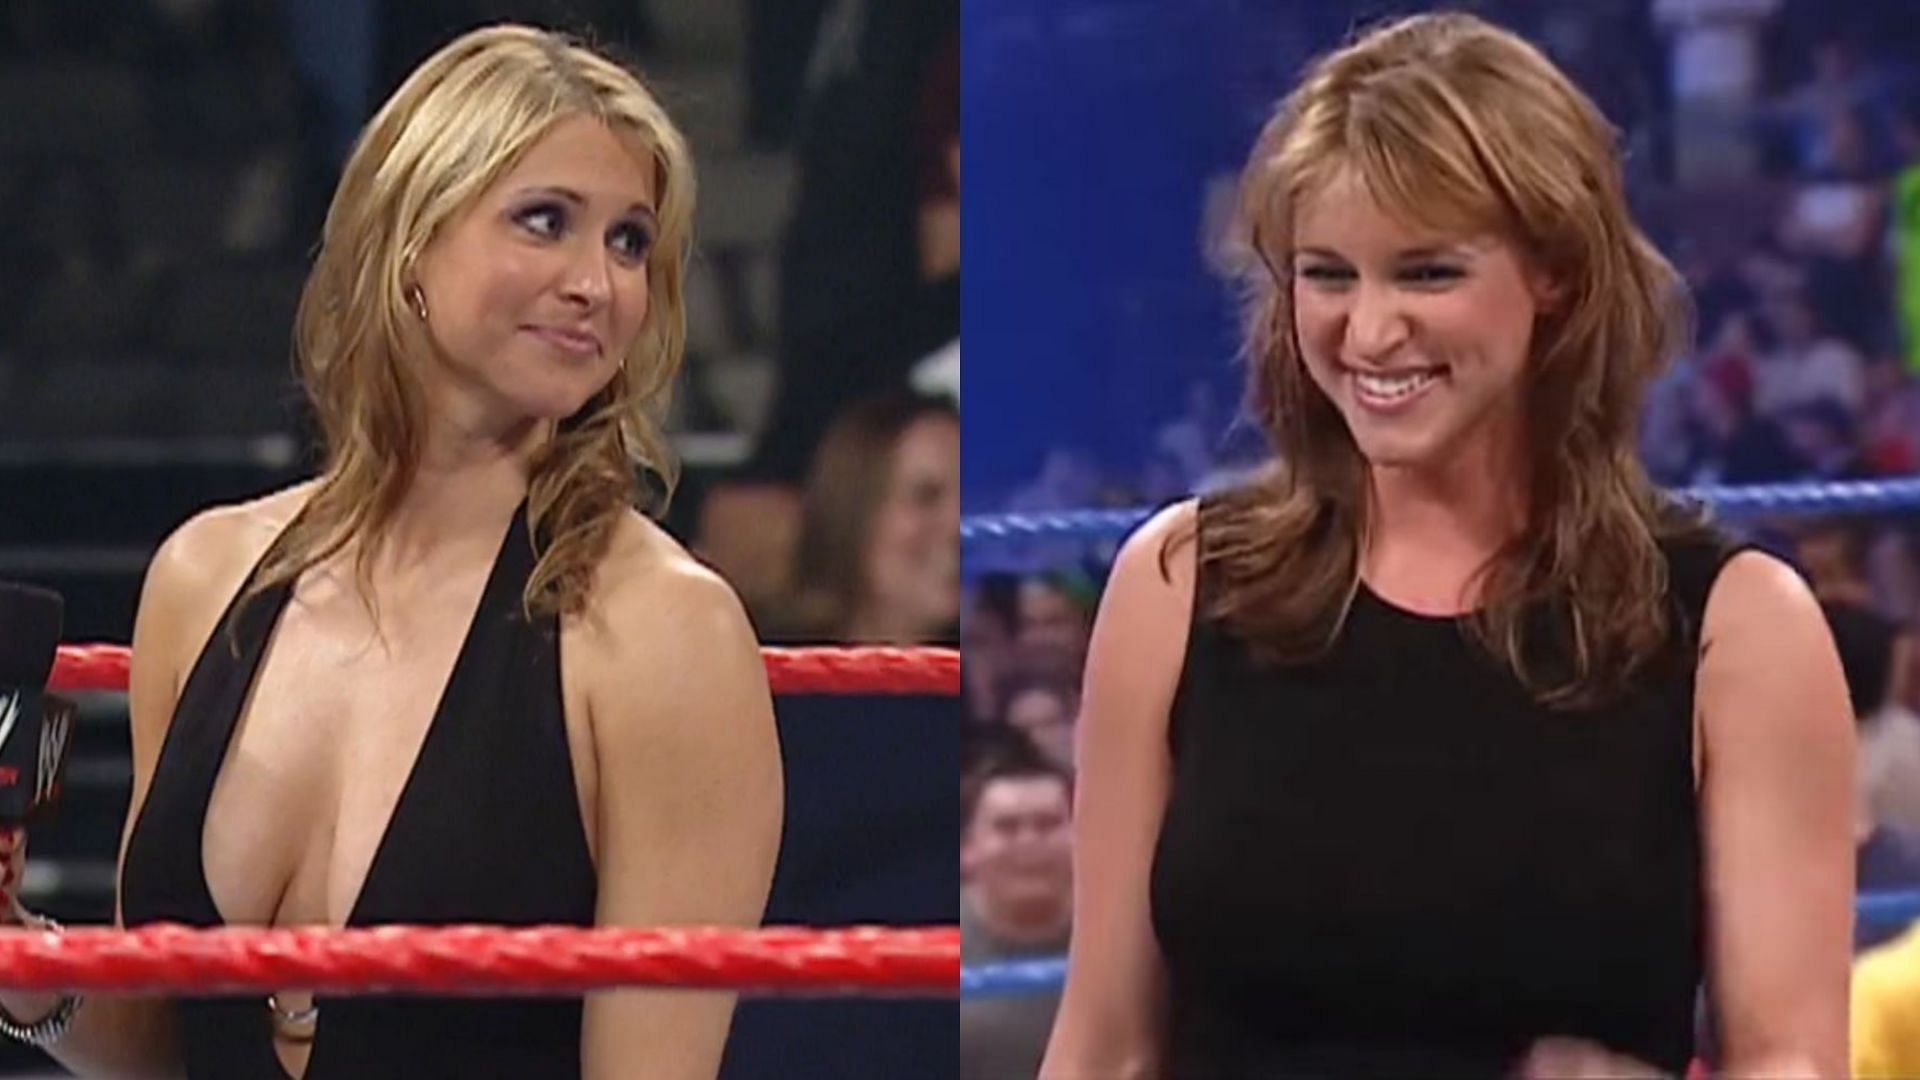 WWE Chairwoman and Co-CEO Stephanie McMahon